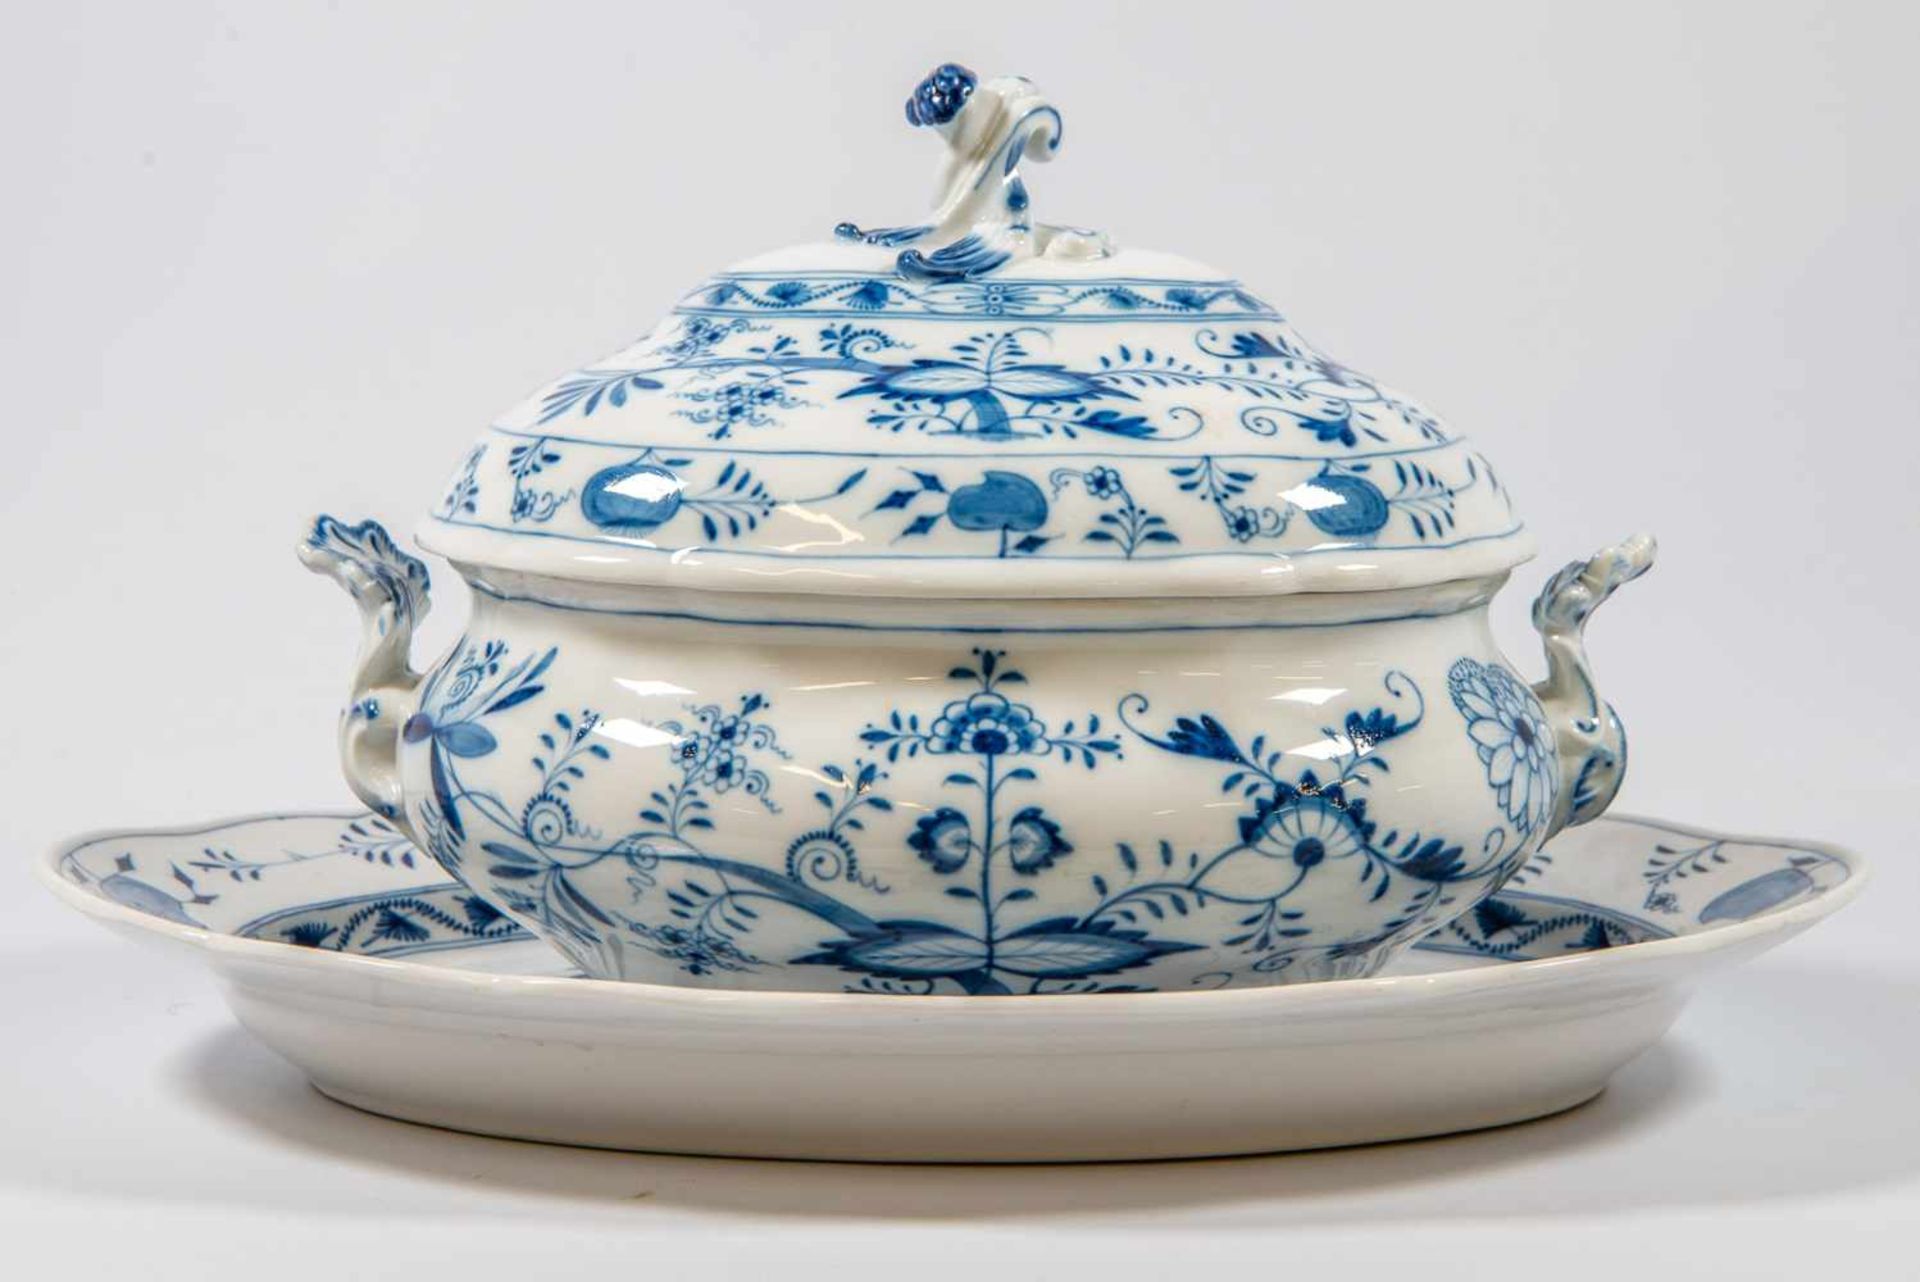 Large Soup Tureen, marked with crossed swords, Meissen zwiebelmuster decor. Length: 46,5 cm , Width: